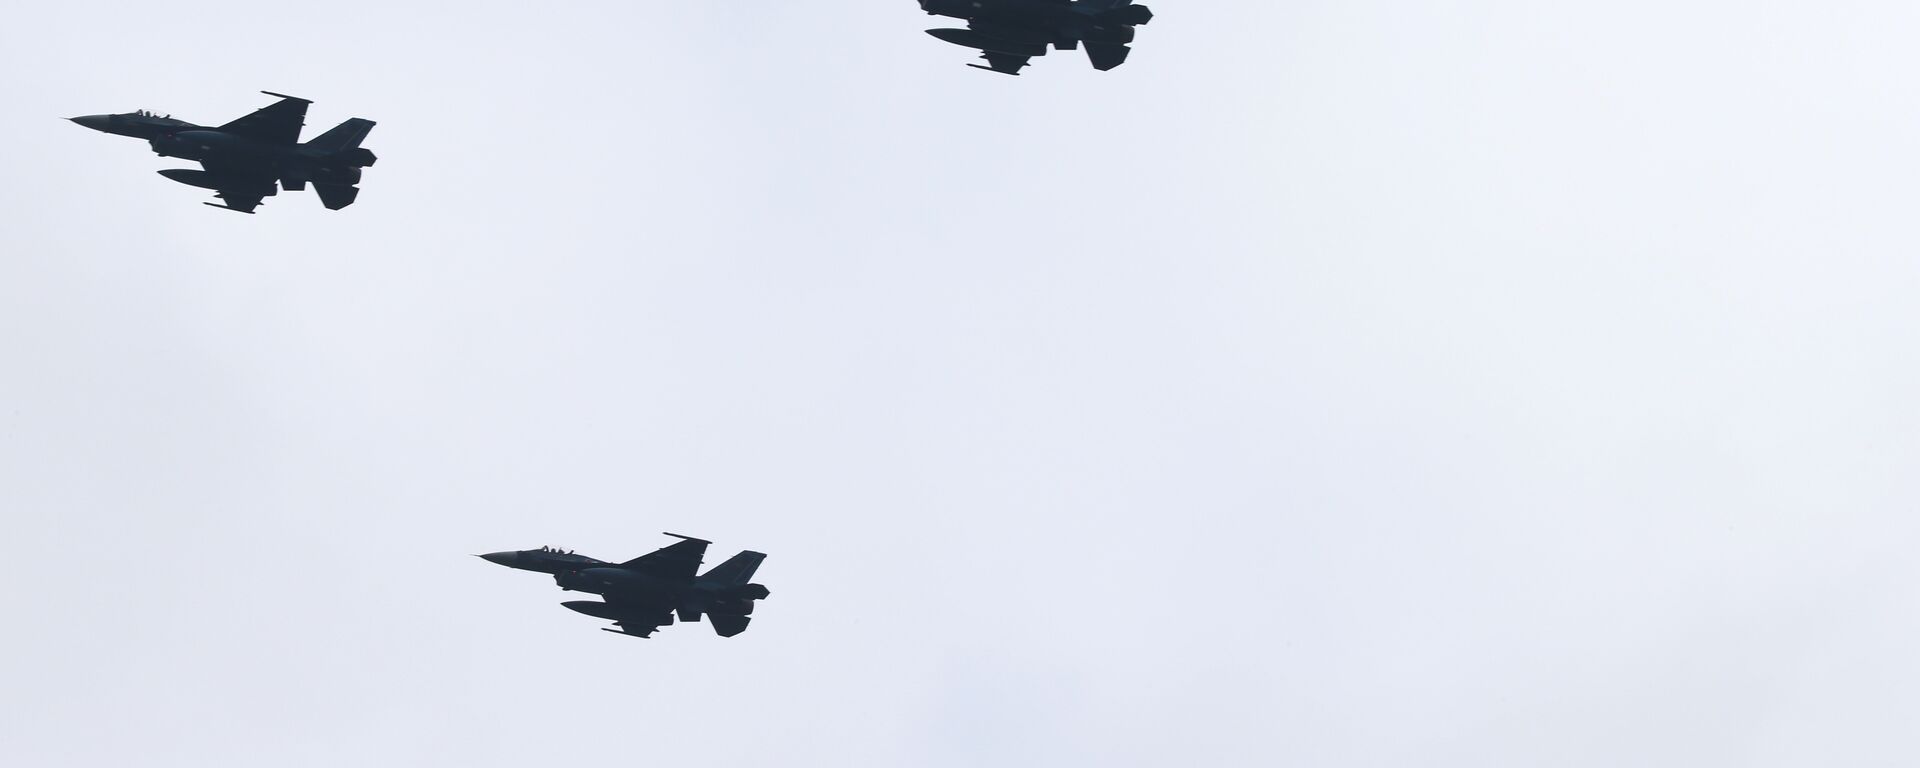 Japan's F-2 fighter jets fly in formation during the annual Self-Defense Forces Commencement of Air Review at Hyakuri Air Base, north of Tokyo, Sunday, Oct. 26, 2014. - Sputnik International, 1920, 09.12.2022